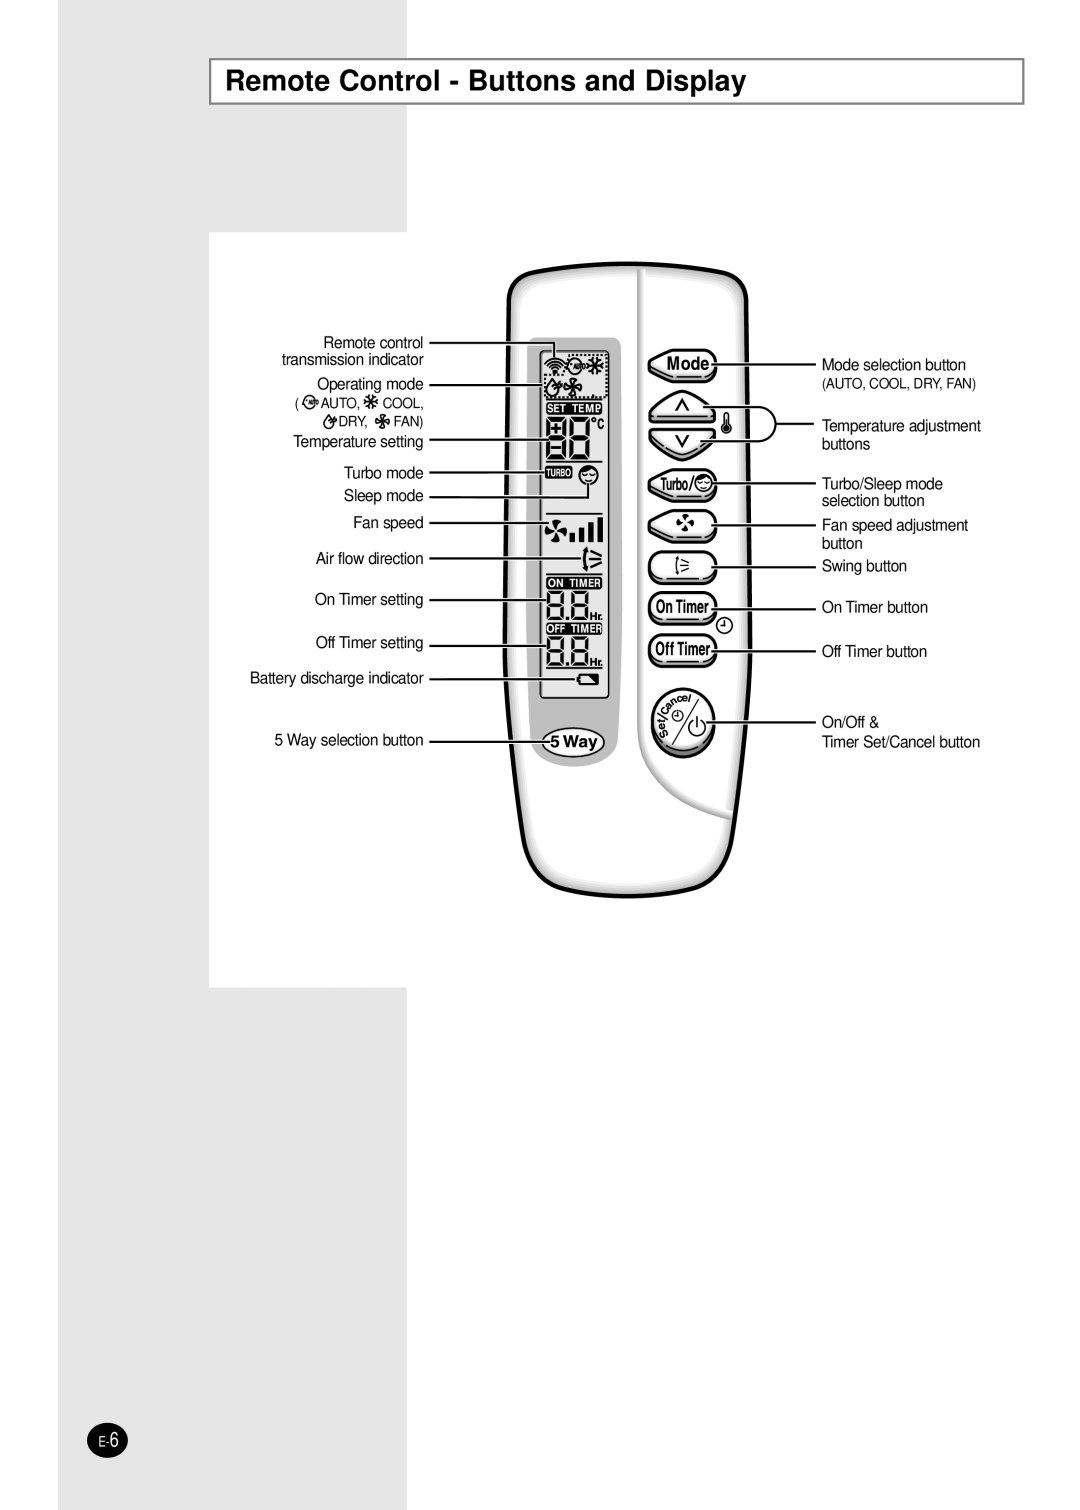 Samsung UMF30C2E4, UMF26C2E3, AMF18C2E, AMF09C2E, AMF12C2E manual Remote Control - Buttons and Display 